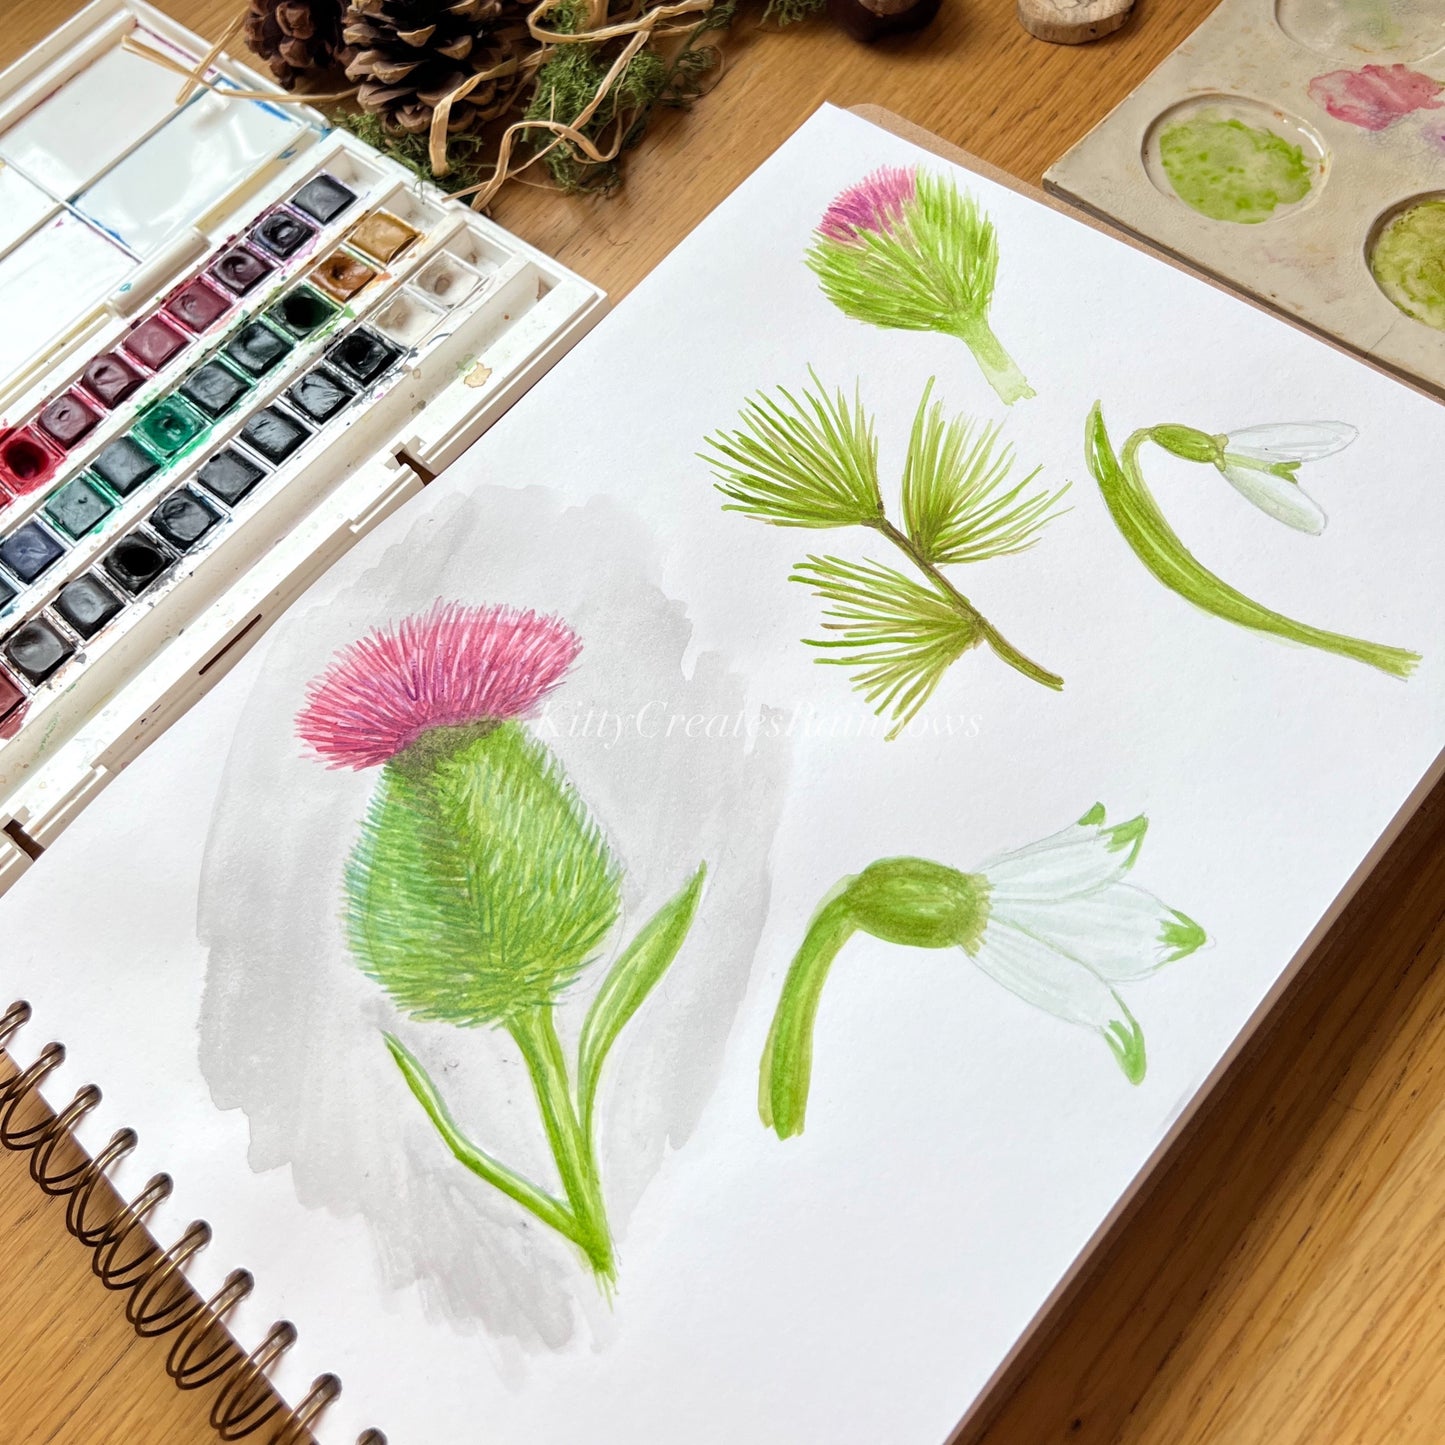 Original watercolour paintings of snowdrops, thistle and winter botanicals by Kat Lovatt